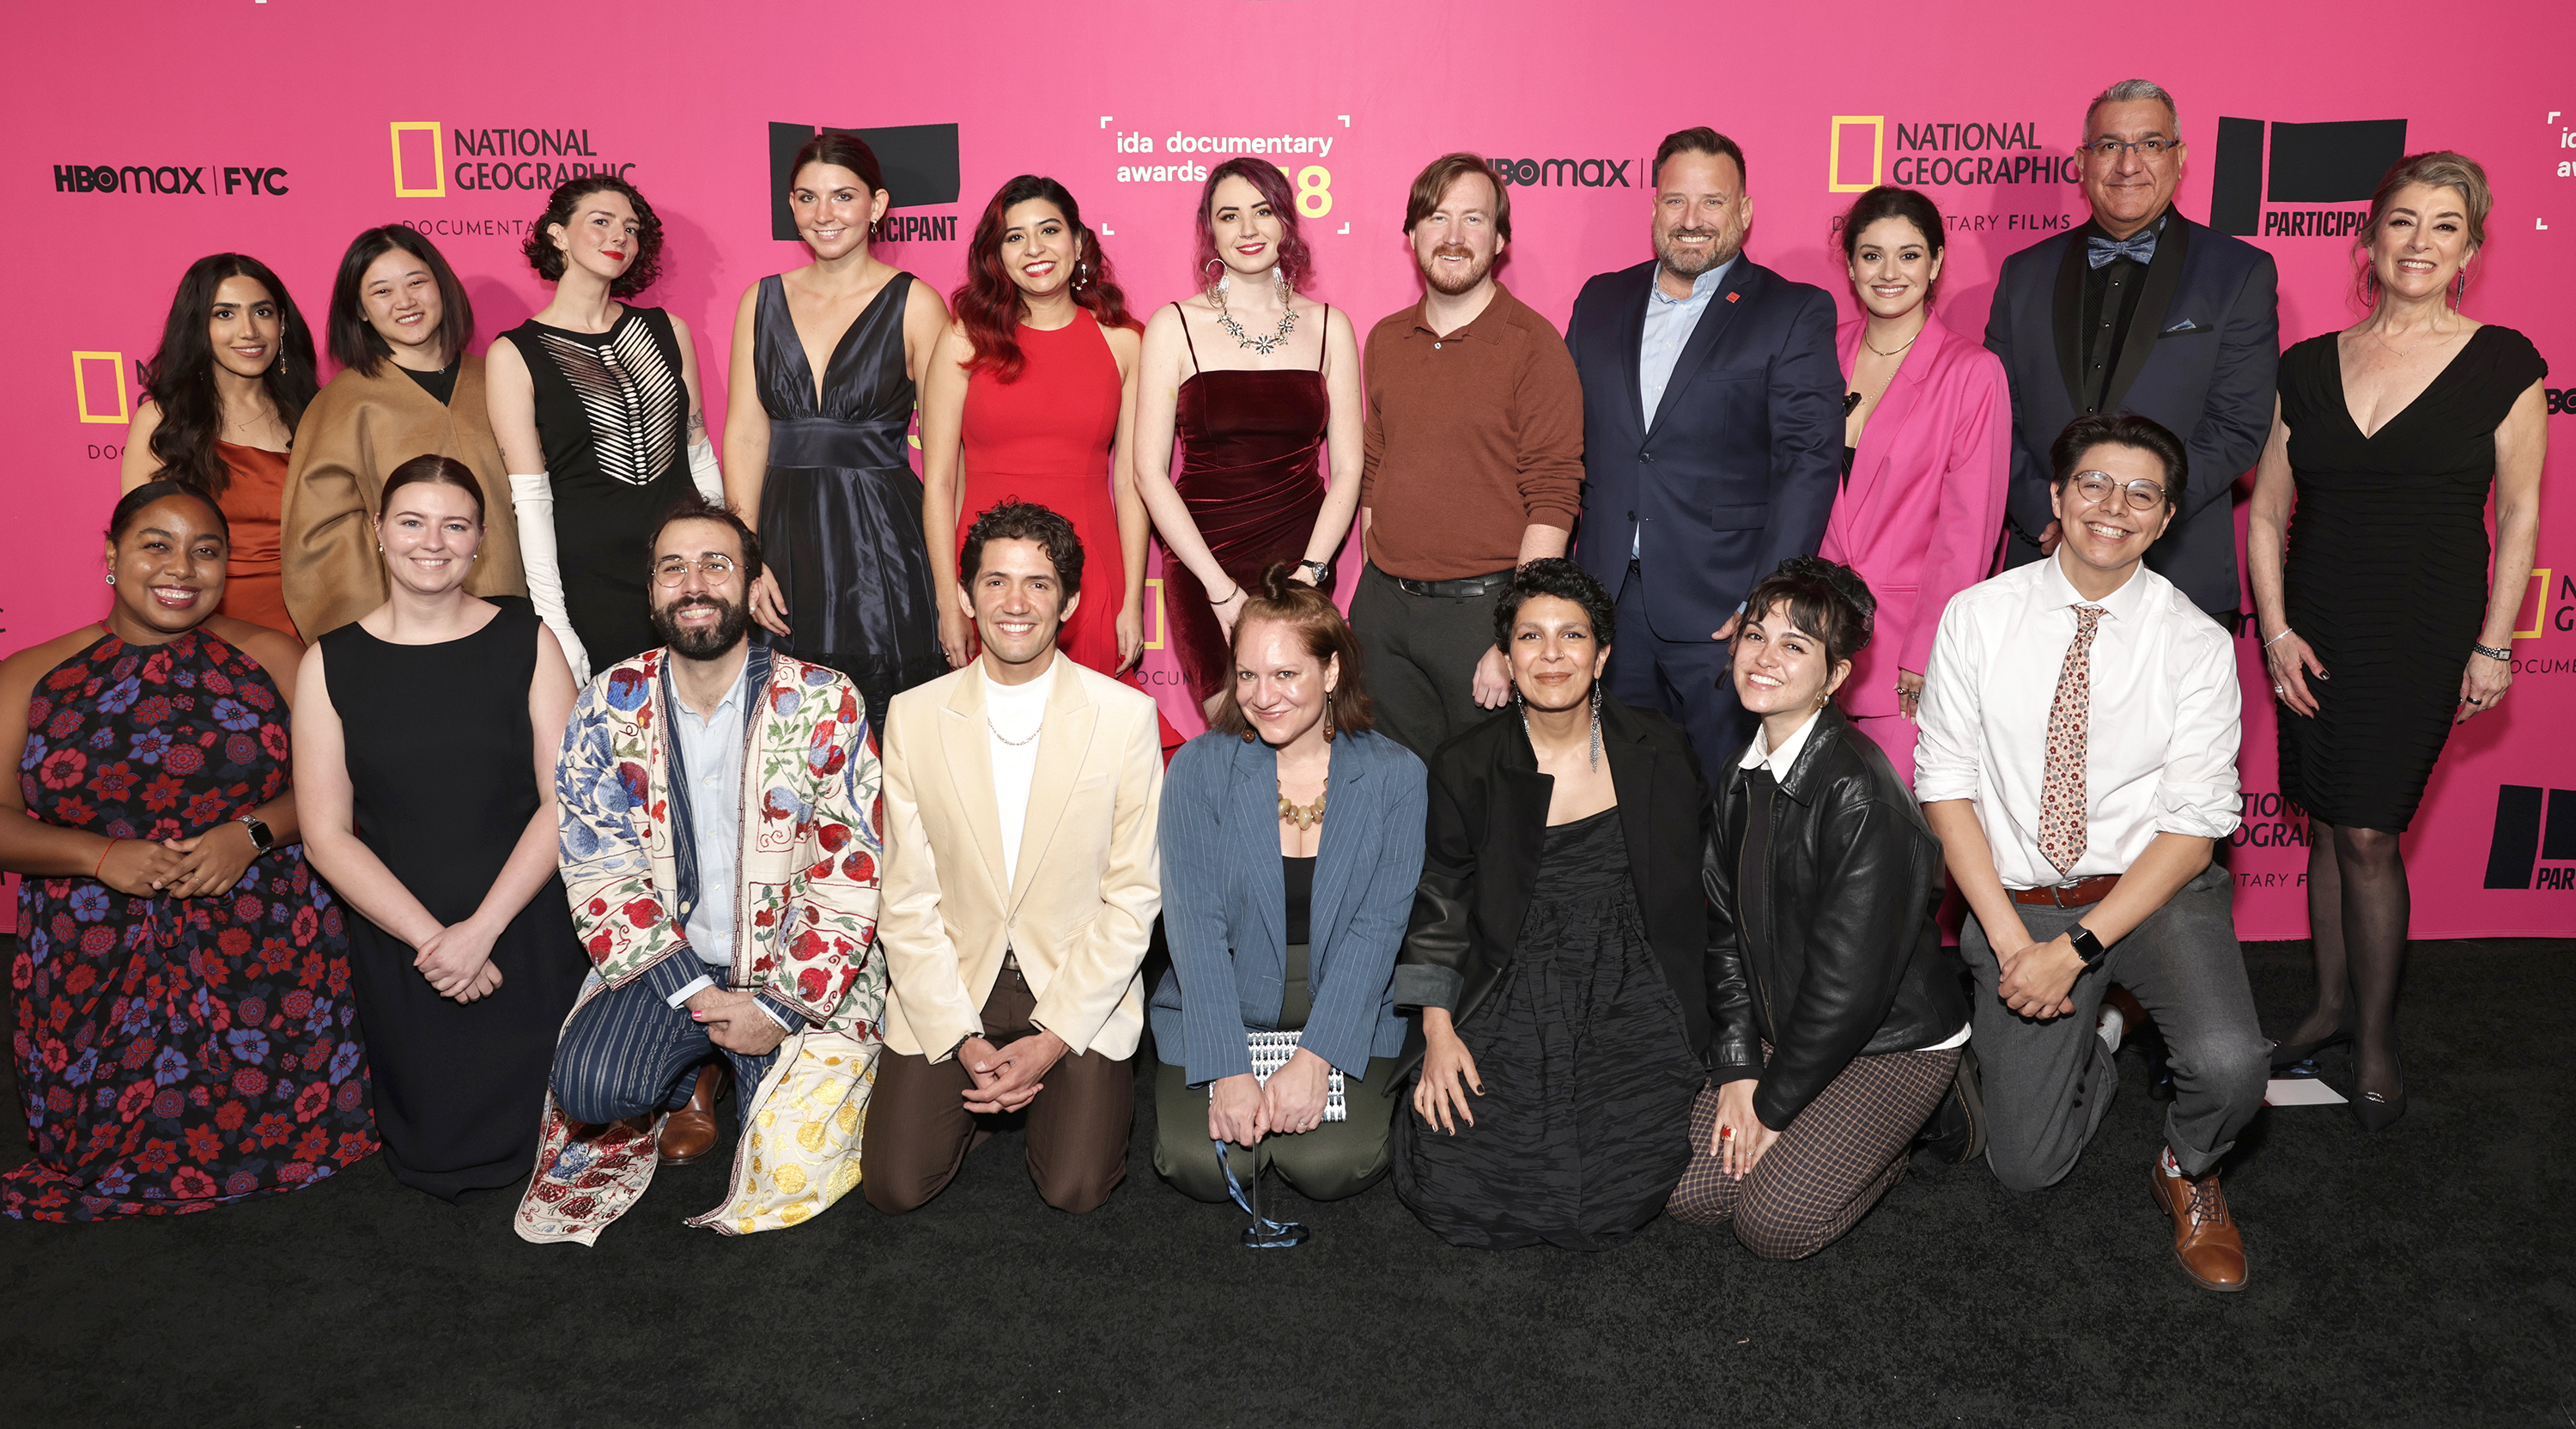 IDA Staff at the Red Carpet of the 38th IDA Documentary Awards, December 10, 2022, Paramount Theatre, Los Angeles.